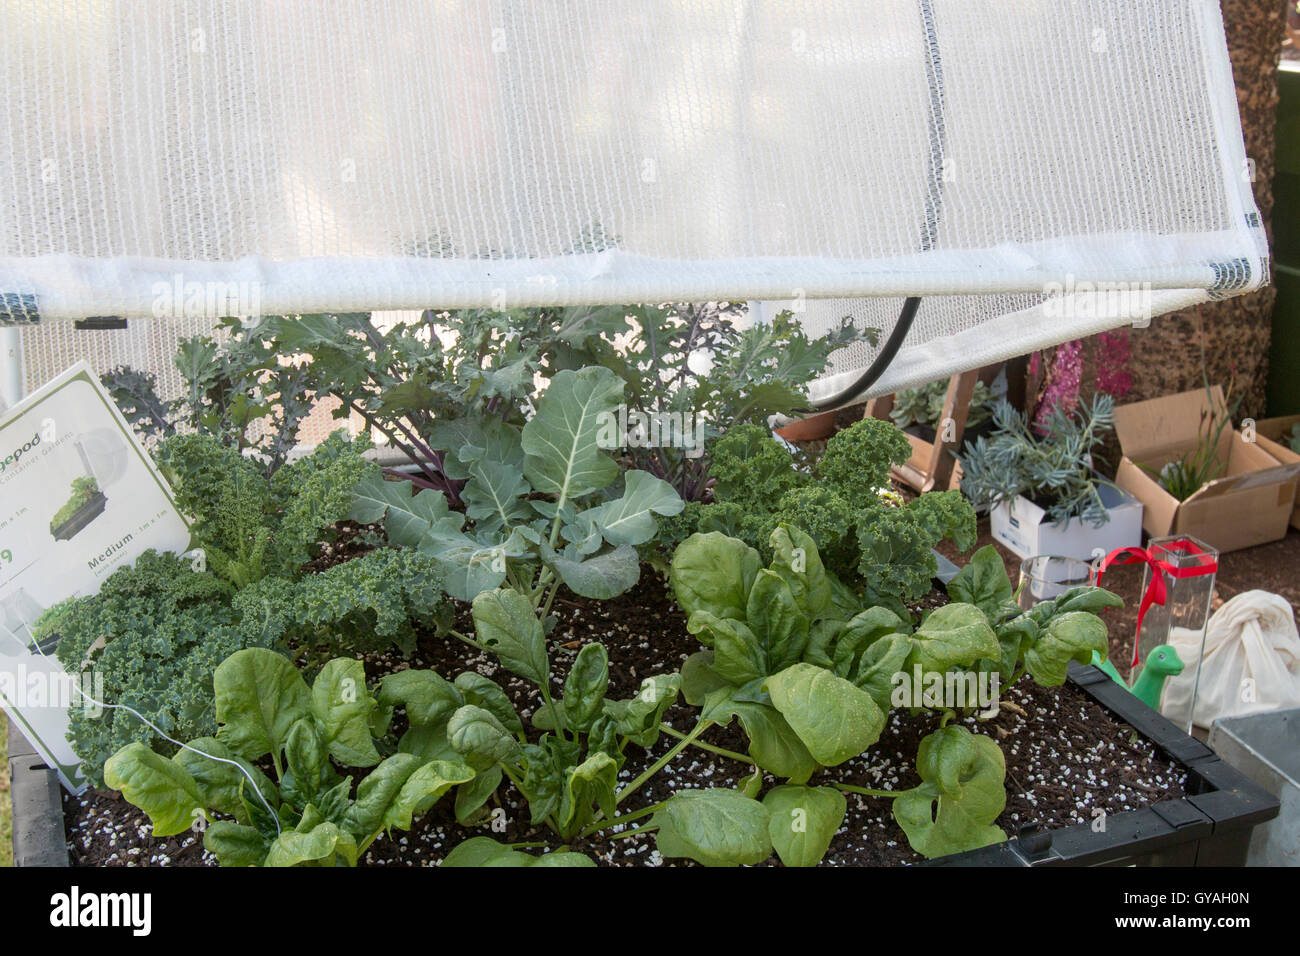 Vegepod used to grow vegetables and plants from sees at home, seen here at an australian primary school Stock Photo